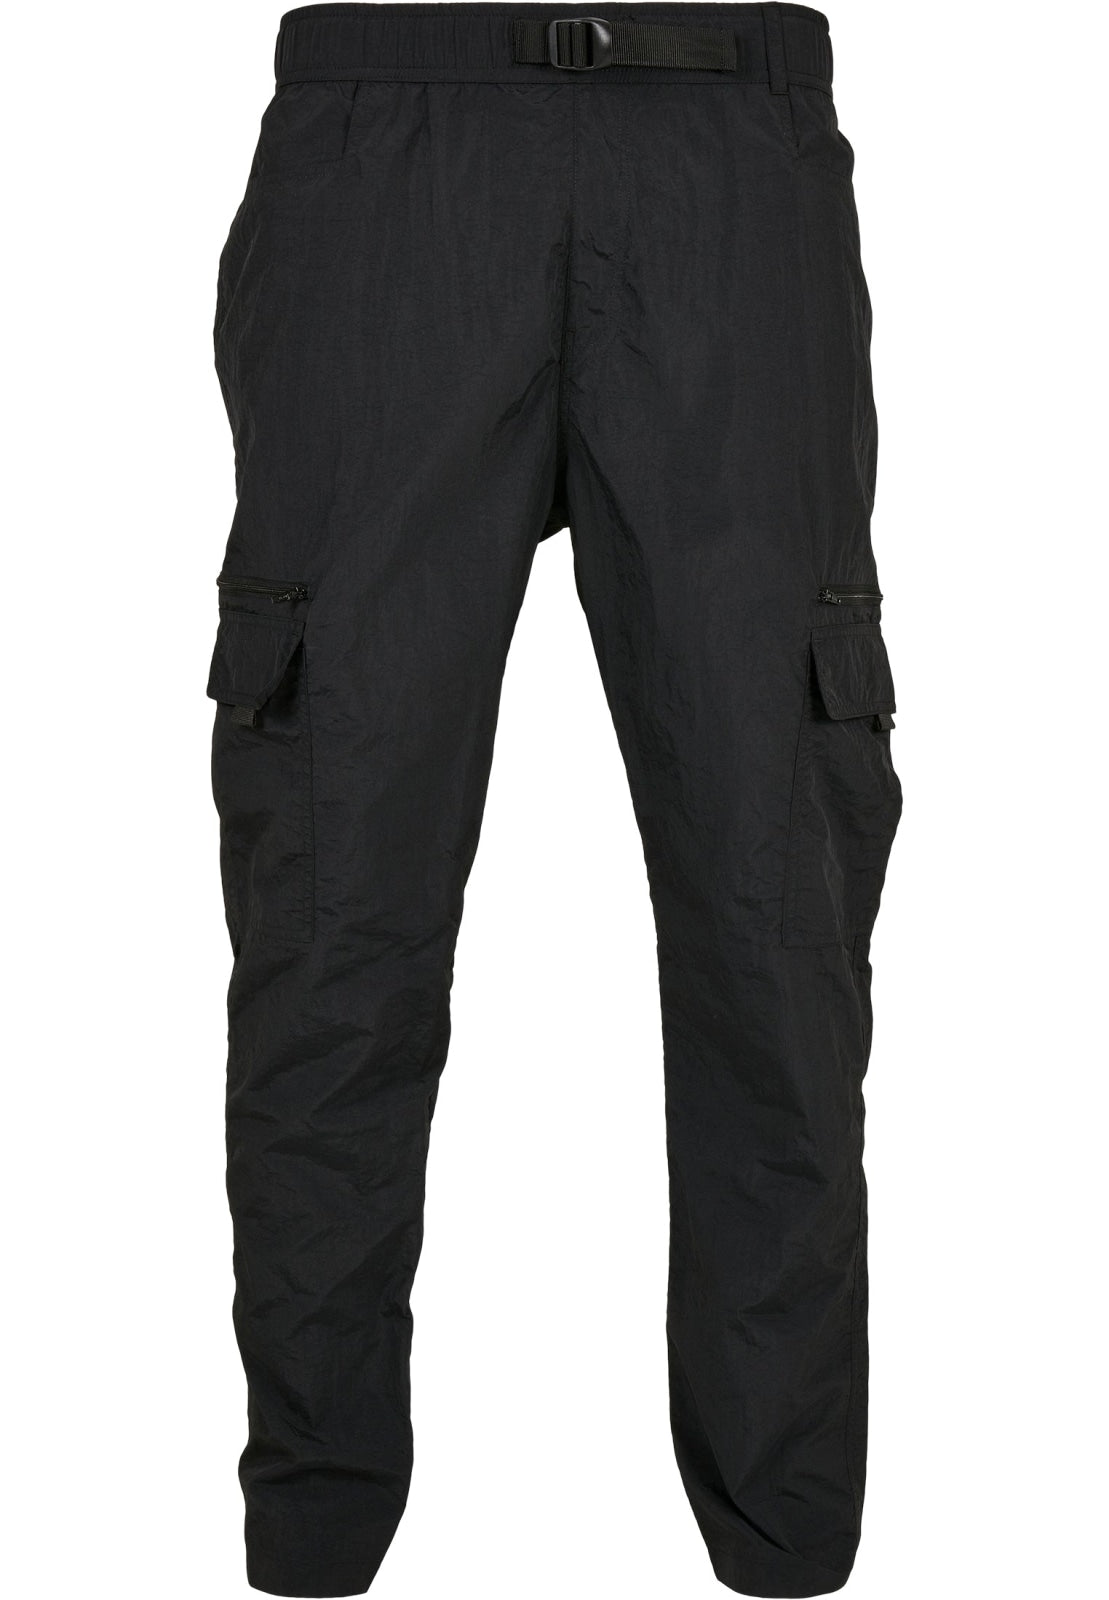 Buy Nylon Cargo Pocket Pants (B&T) Men's Jeans & Pants from Buyers Picks.  Find Buyers Picks fashion & more at DrJays.com